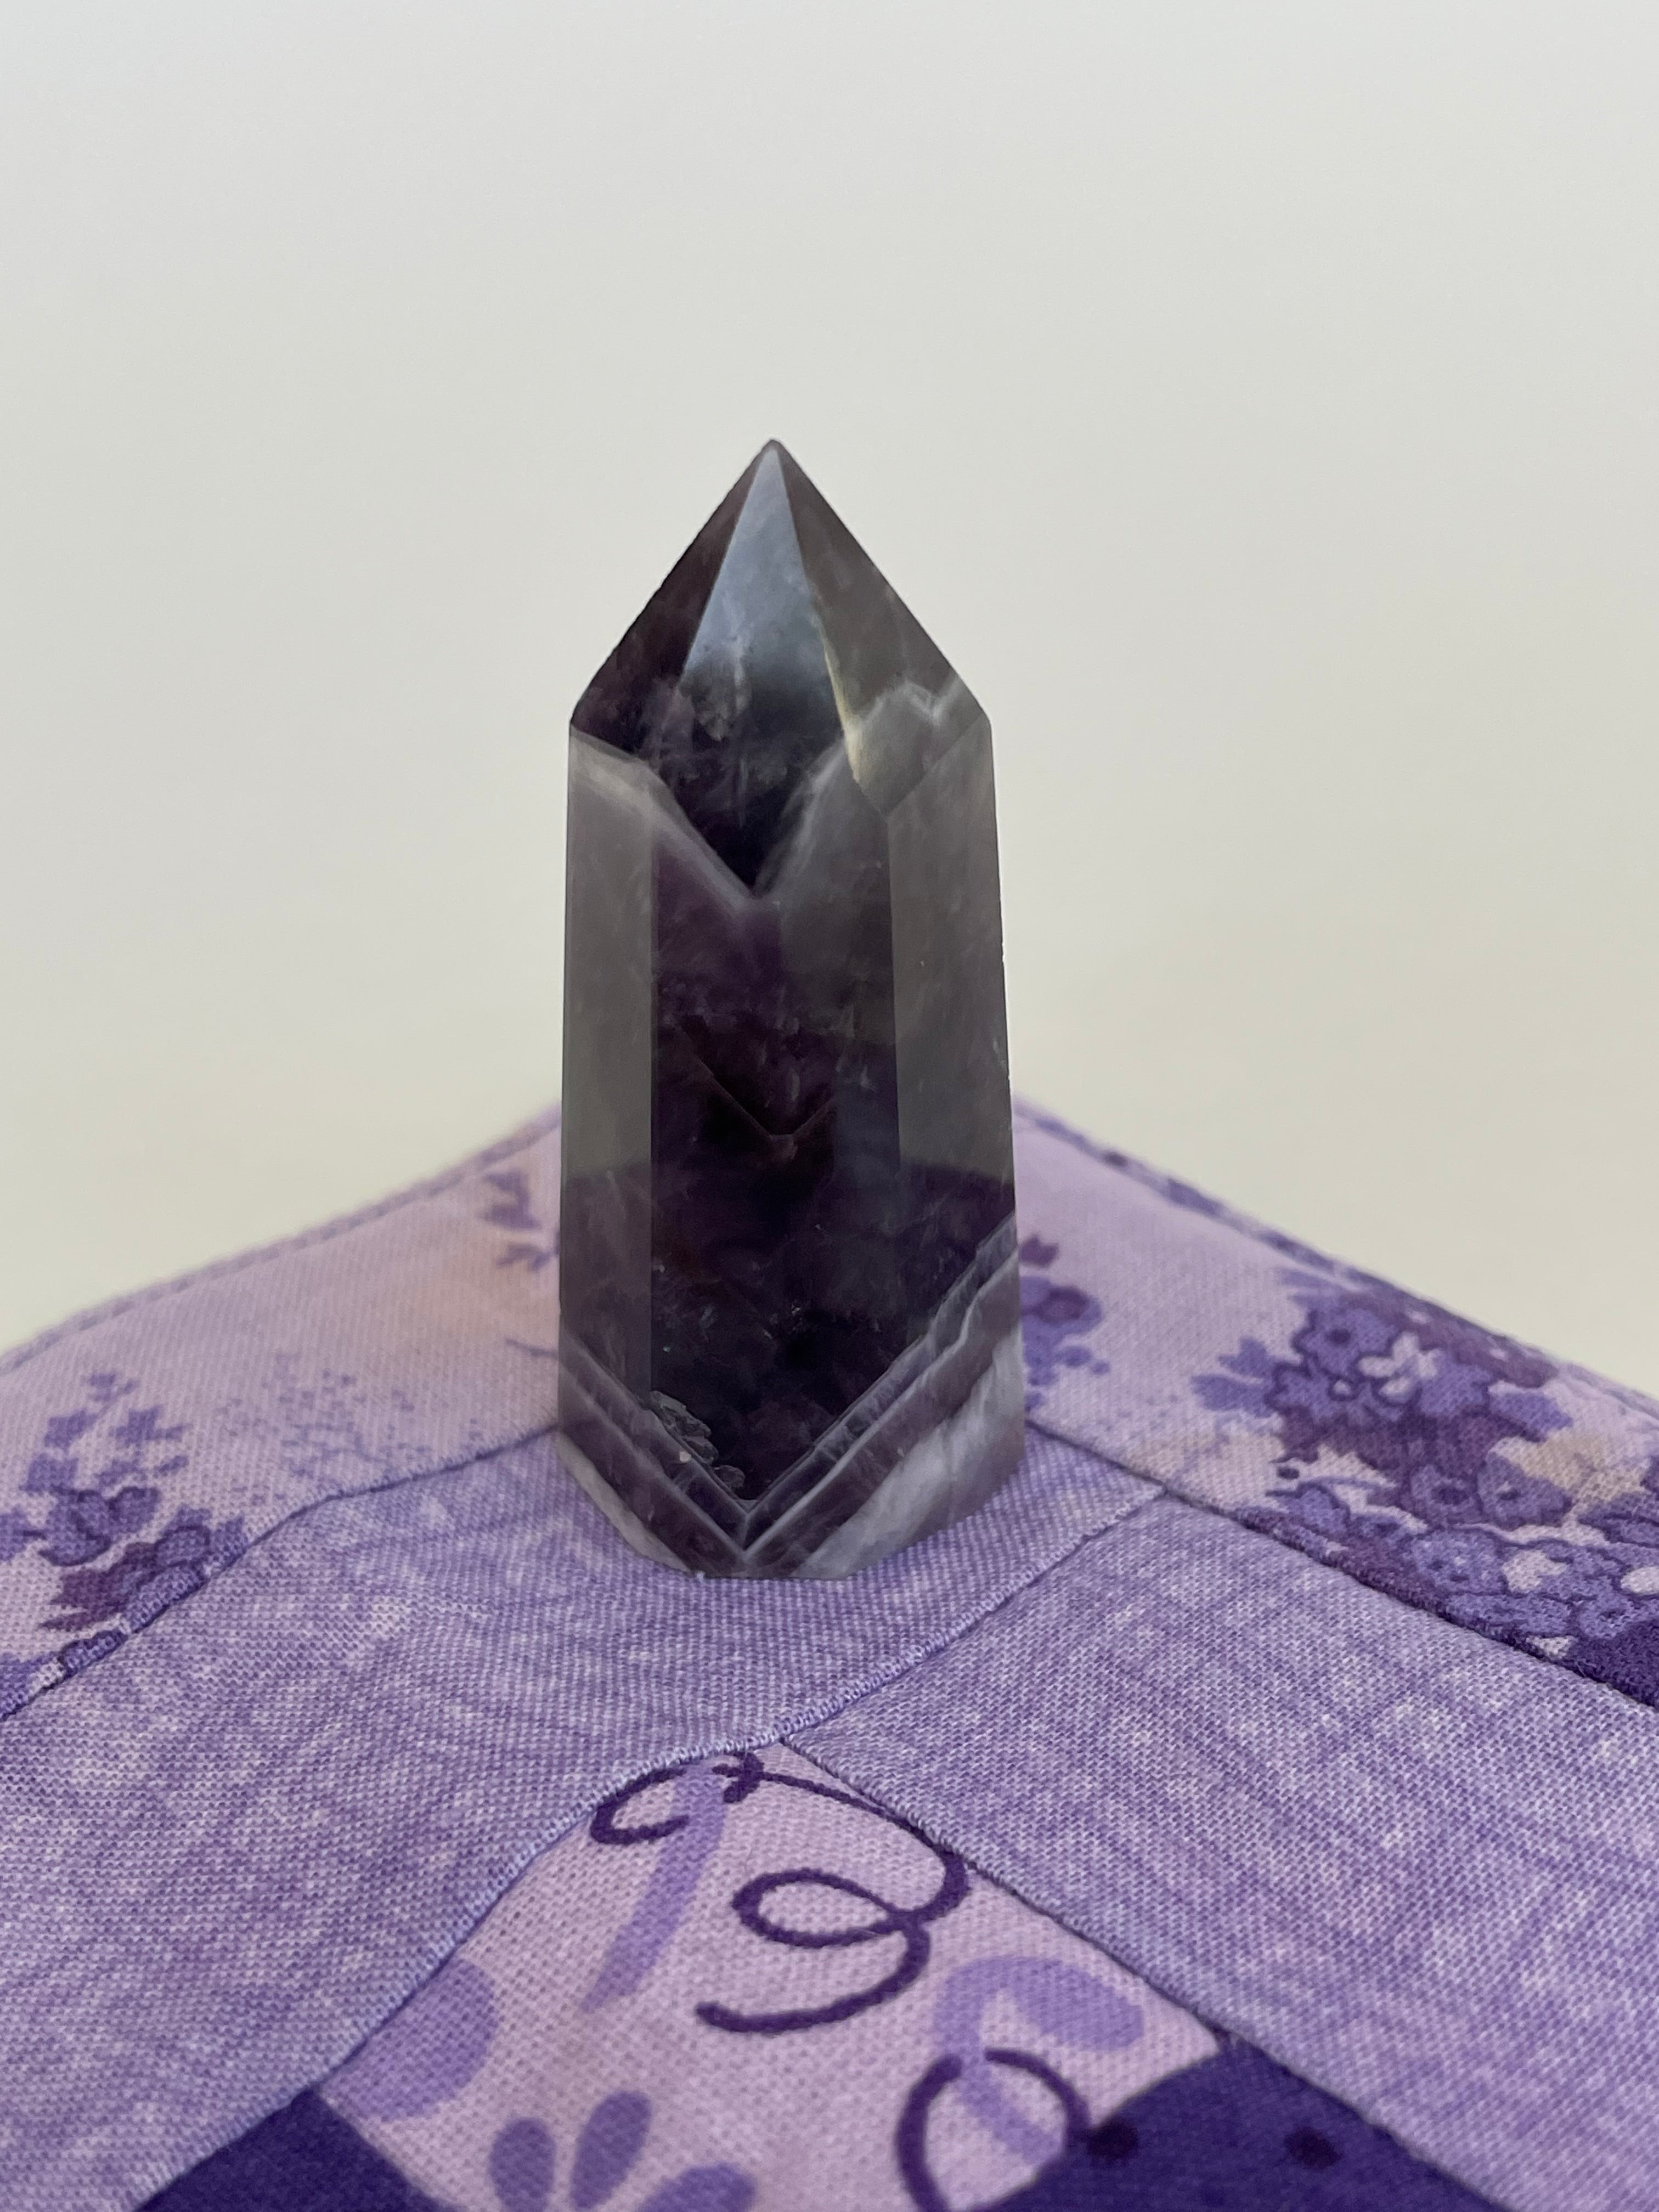 Alternate view. Chevron amethyst tower with the coolest banding for your altar, for healing or as décor for any room in your home or office. Amethyst, one of the most spiritual gemstones, heals, cleanses & calms, allowing you to reach meditative & higher consciousness levels more easily. It also helps to dispel negative emotional states and more. Chevron amethyst is a combination of amethyst and white quartz and when you add the quartz you get additional qualities. 2" long. Cost is $9.